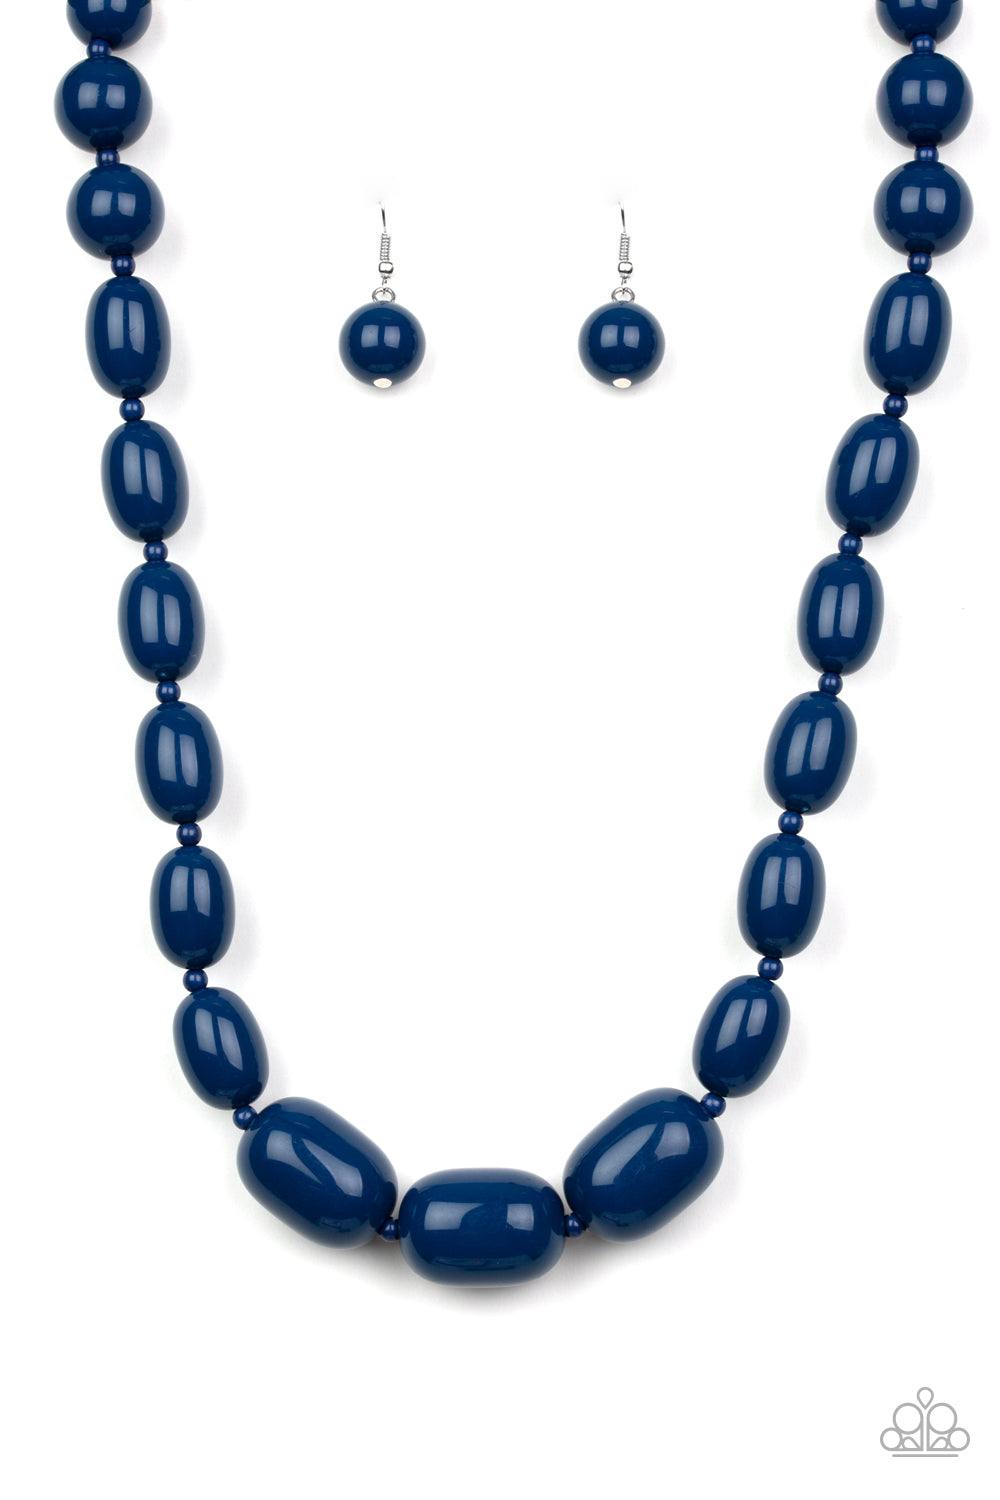 Poppin' Popularity - Blue Necklaces